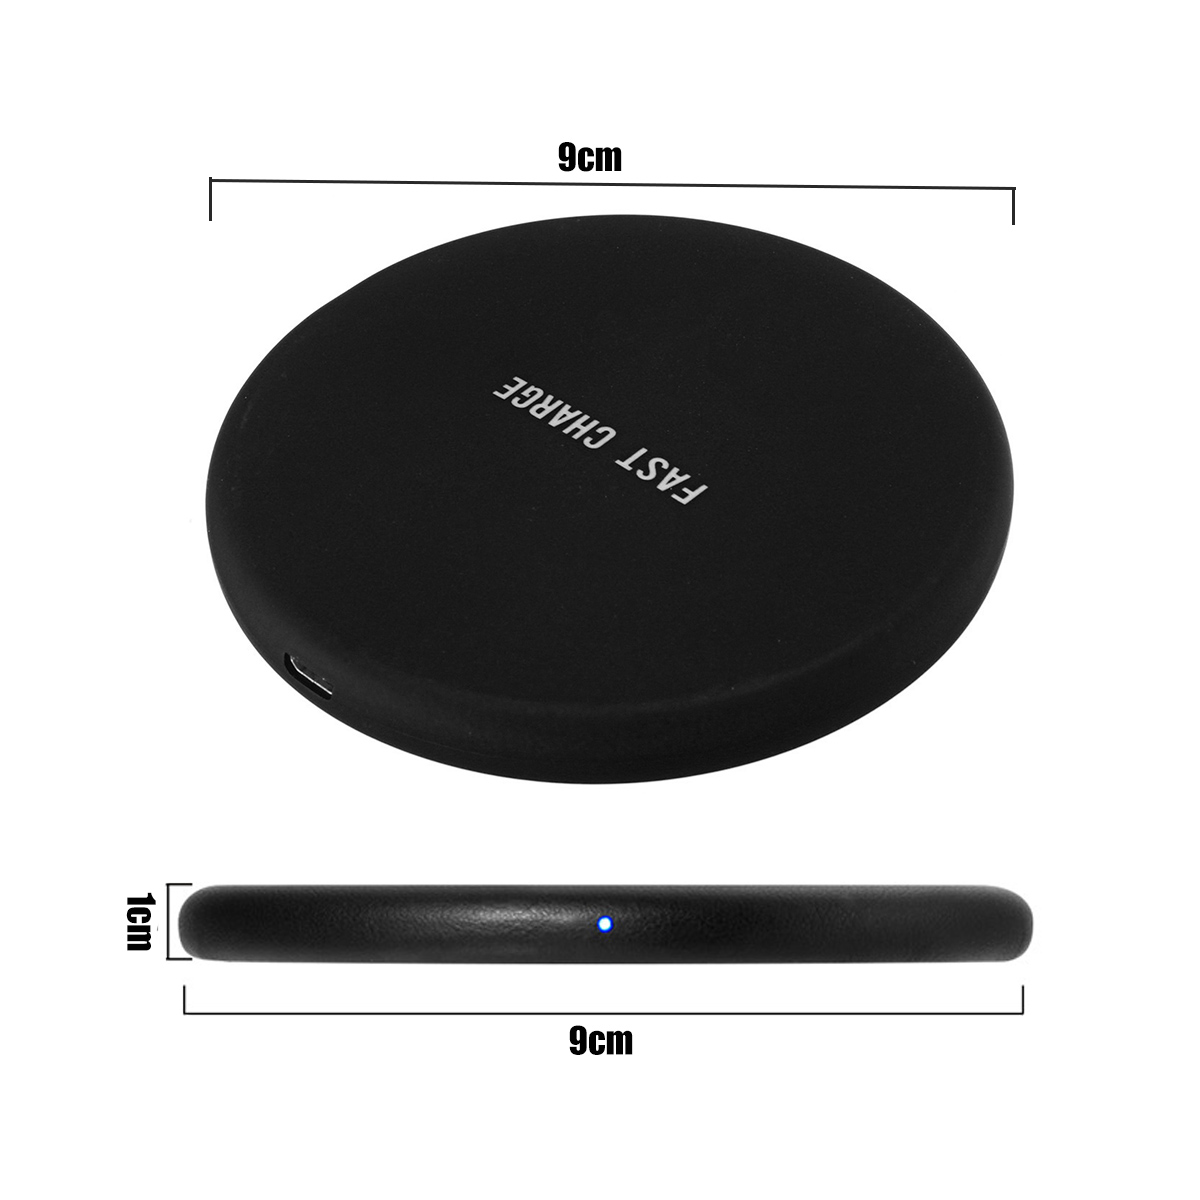 Bakeey Qi Wireless Charger With LED Indicator For iPhone X 8Plus Samsung S8 S7 Note 8